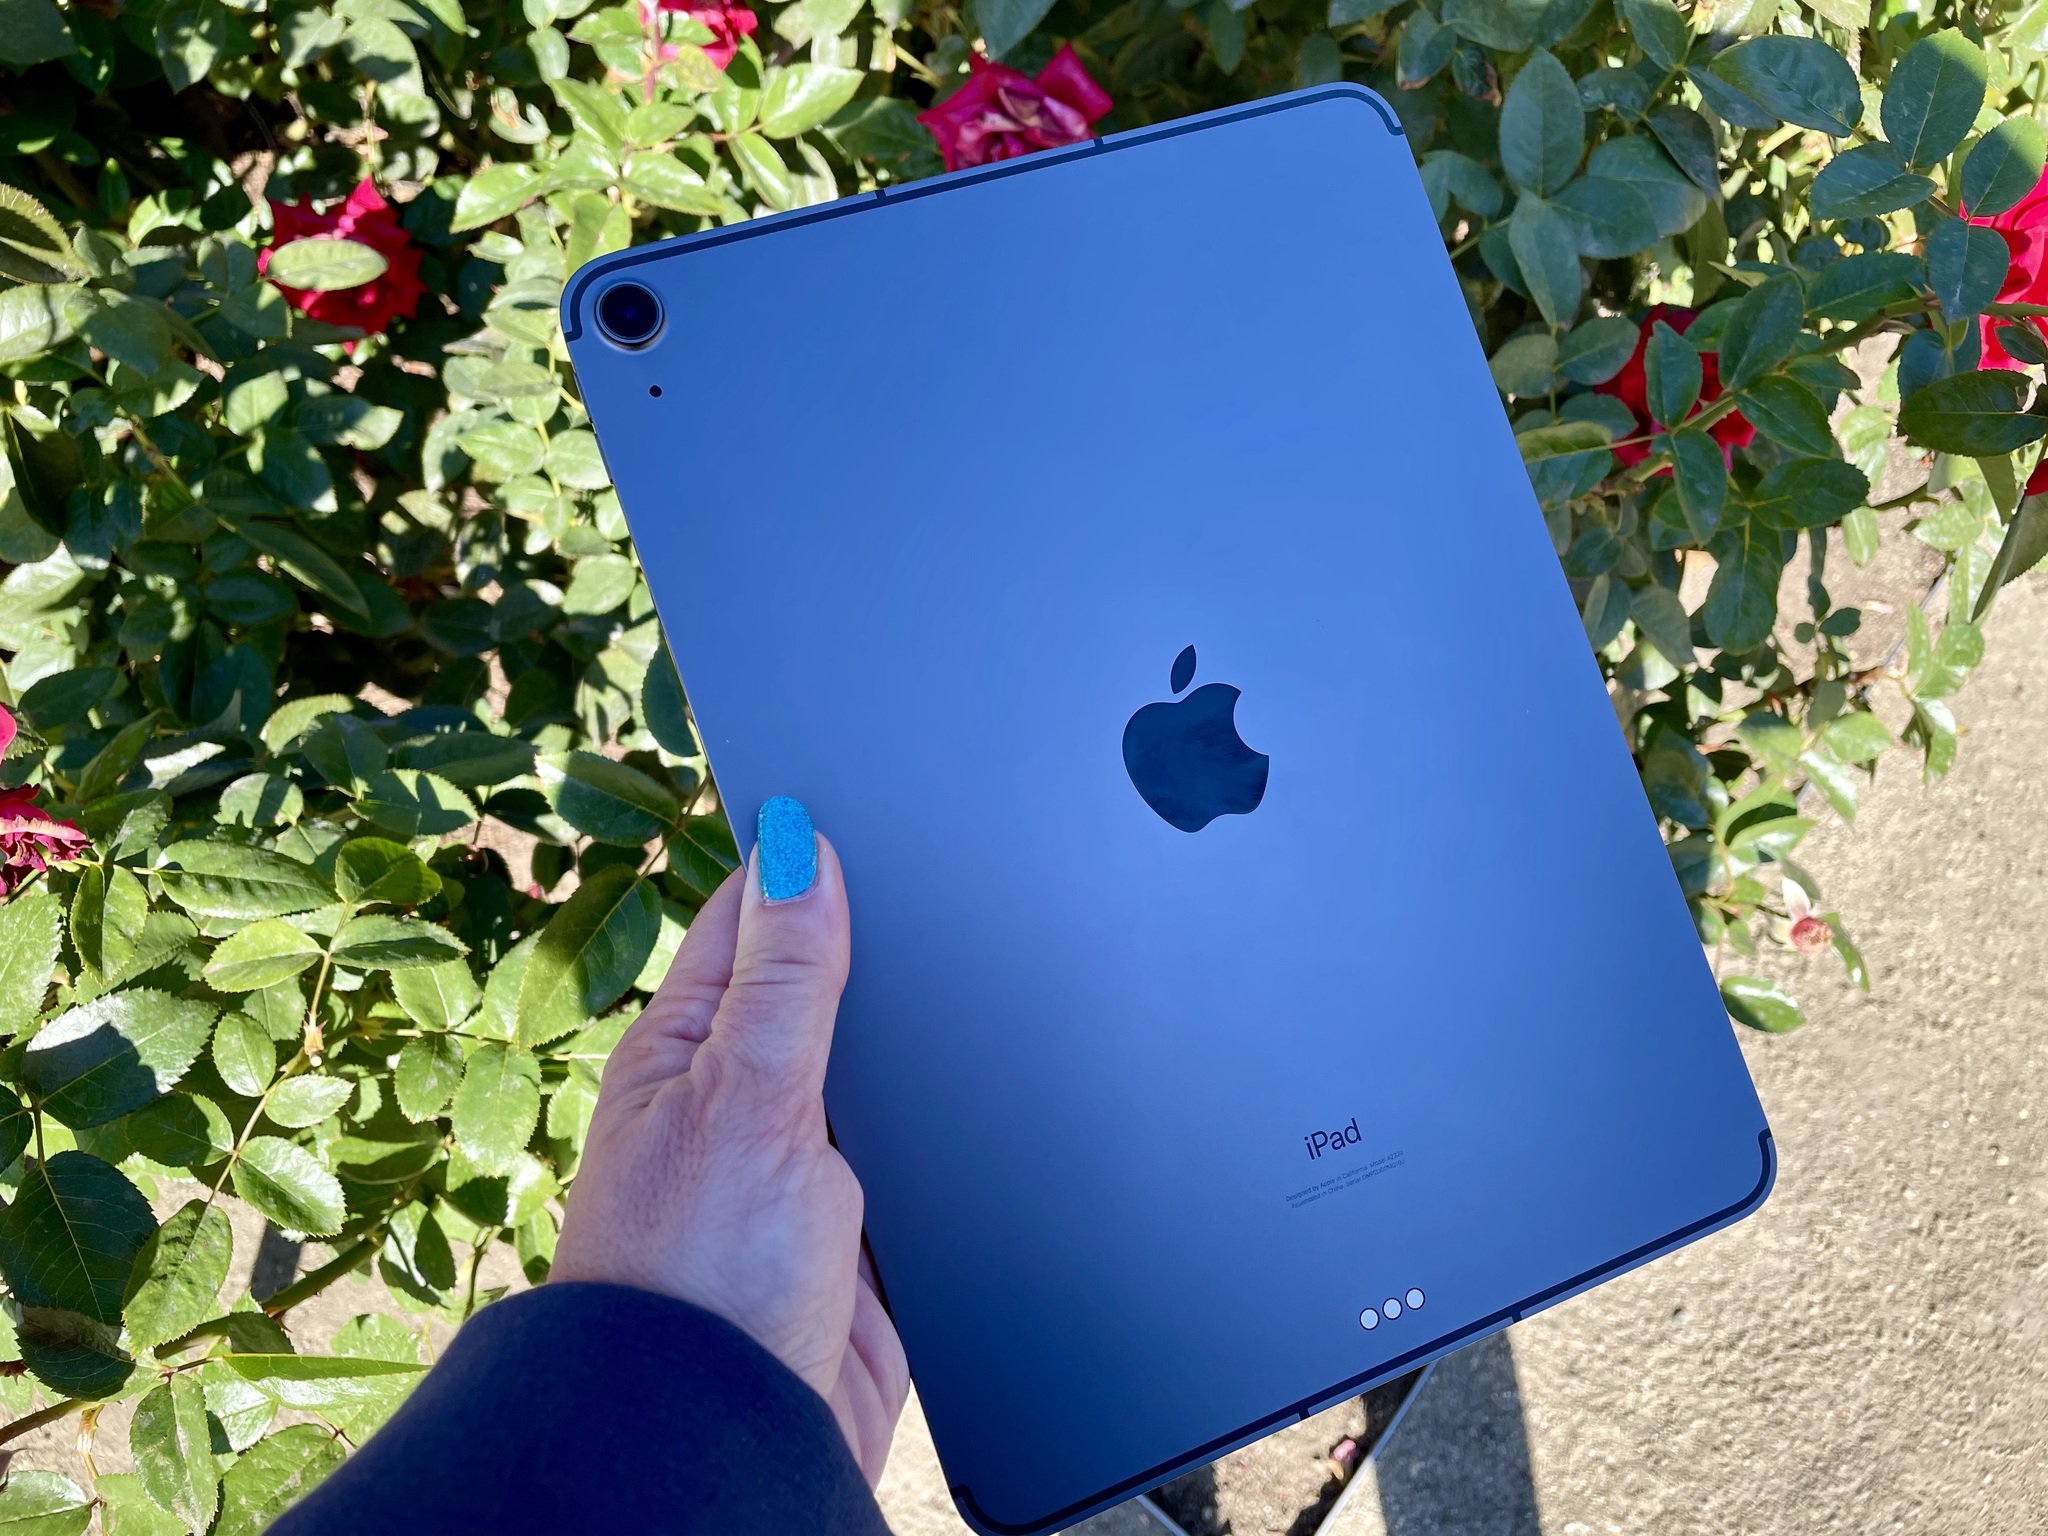 iPad Air 5 vs. Air 4: Which should you buy?